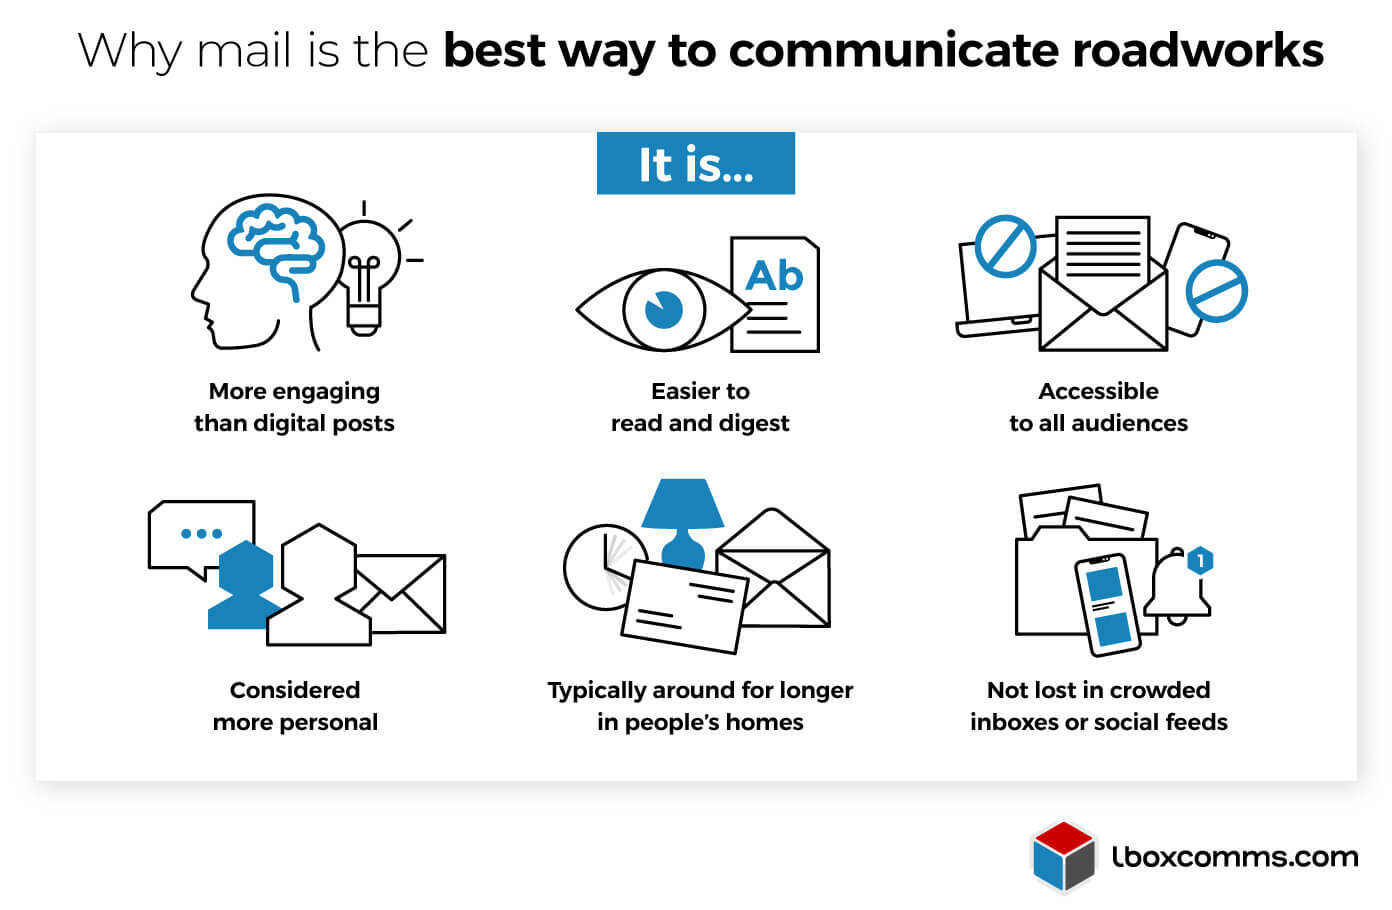 Why mail is the best way to communicate roadworks to local residents and public - Infographic image